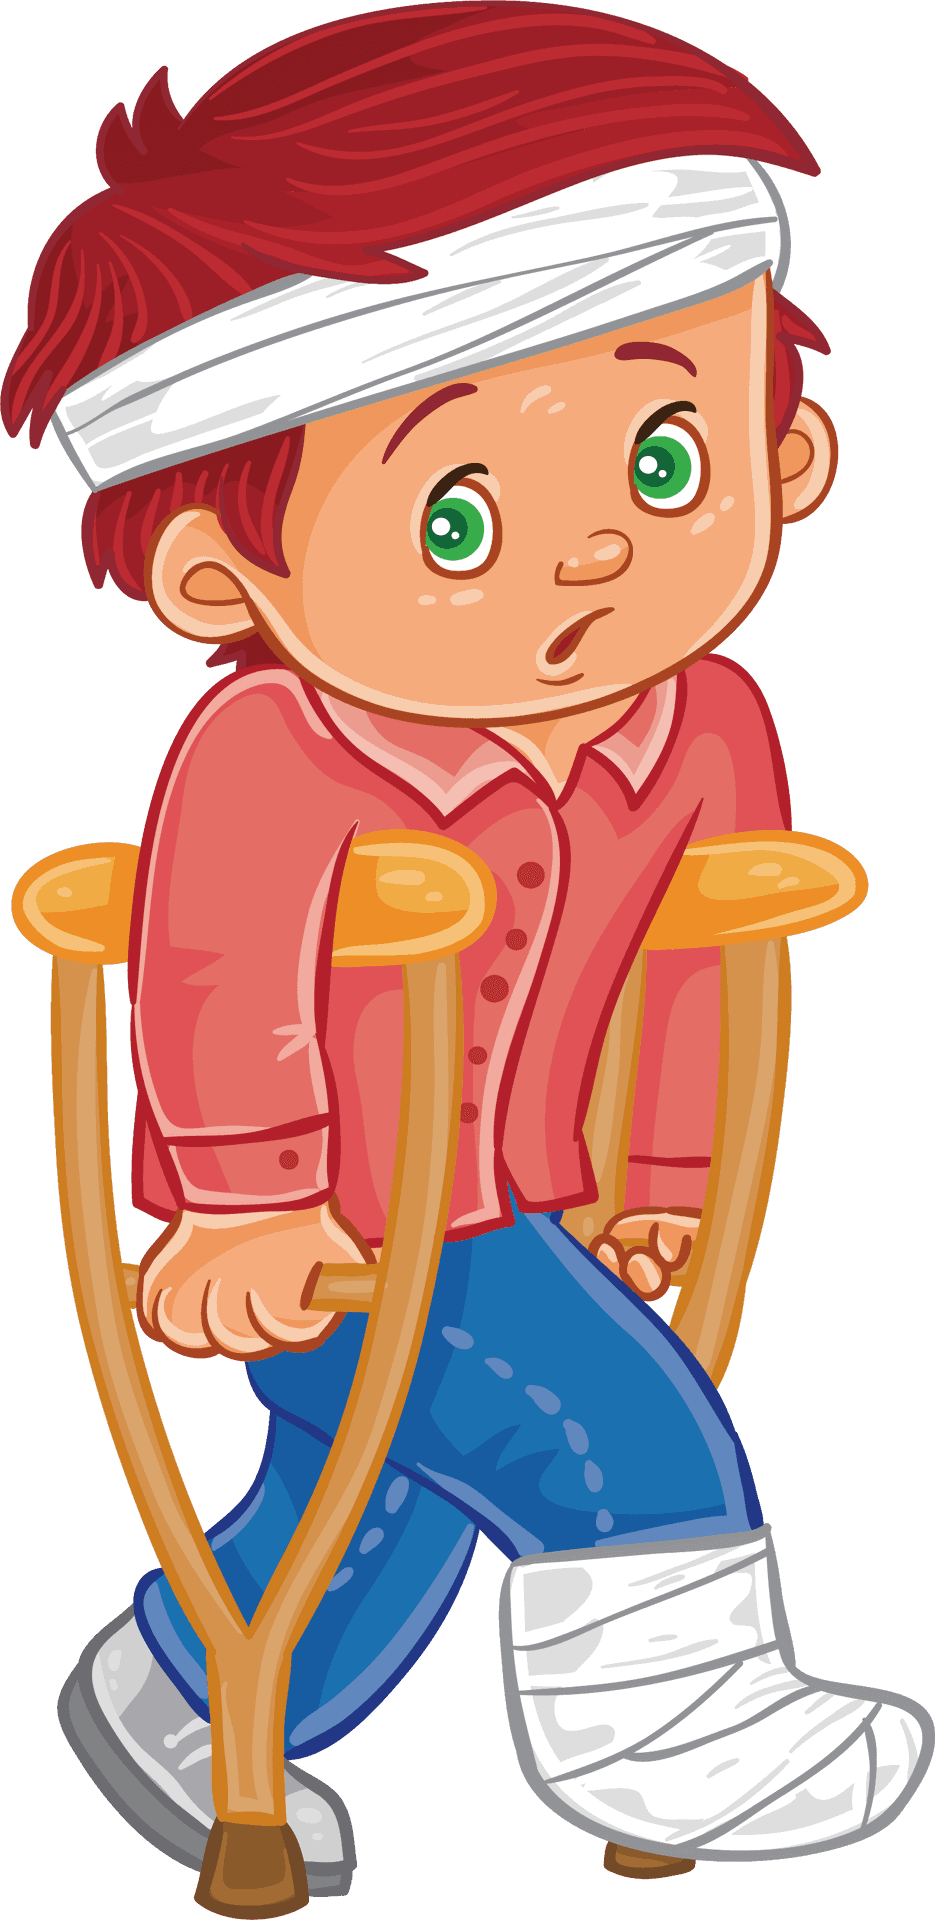 Injured Child Cartoon Character PNG